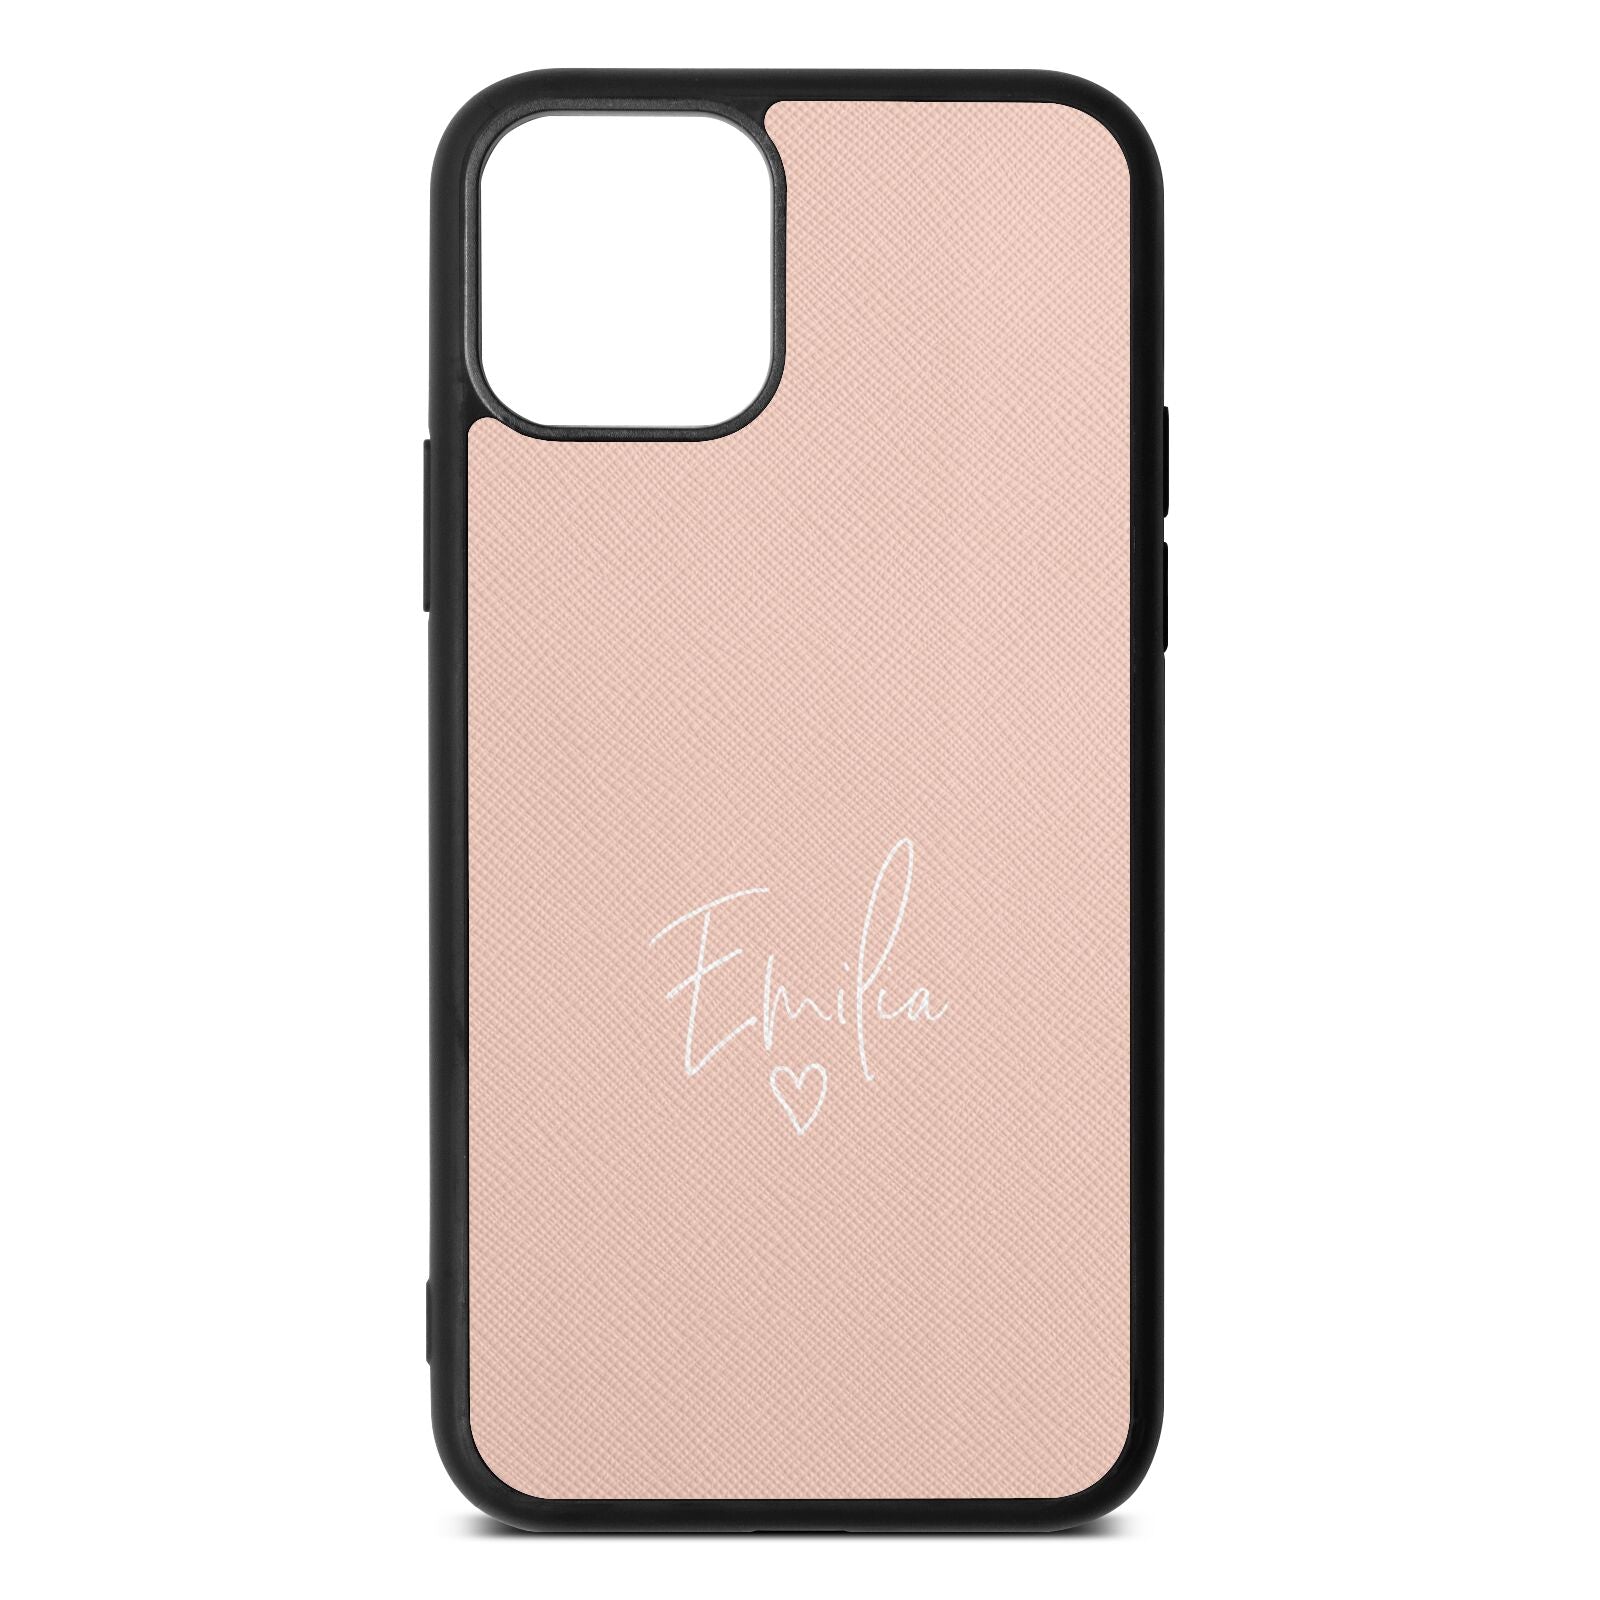 White Handwritten Name Transparent Nude Saffiano Leather iPhone 11 Case